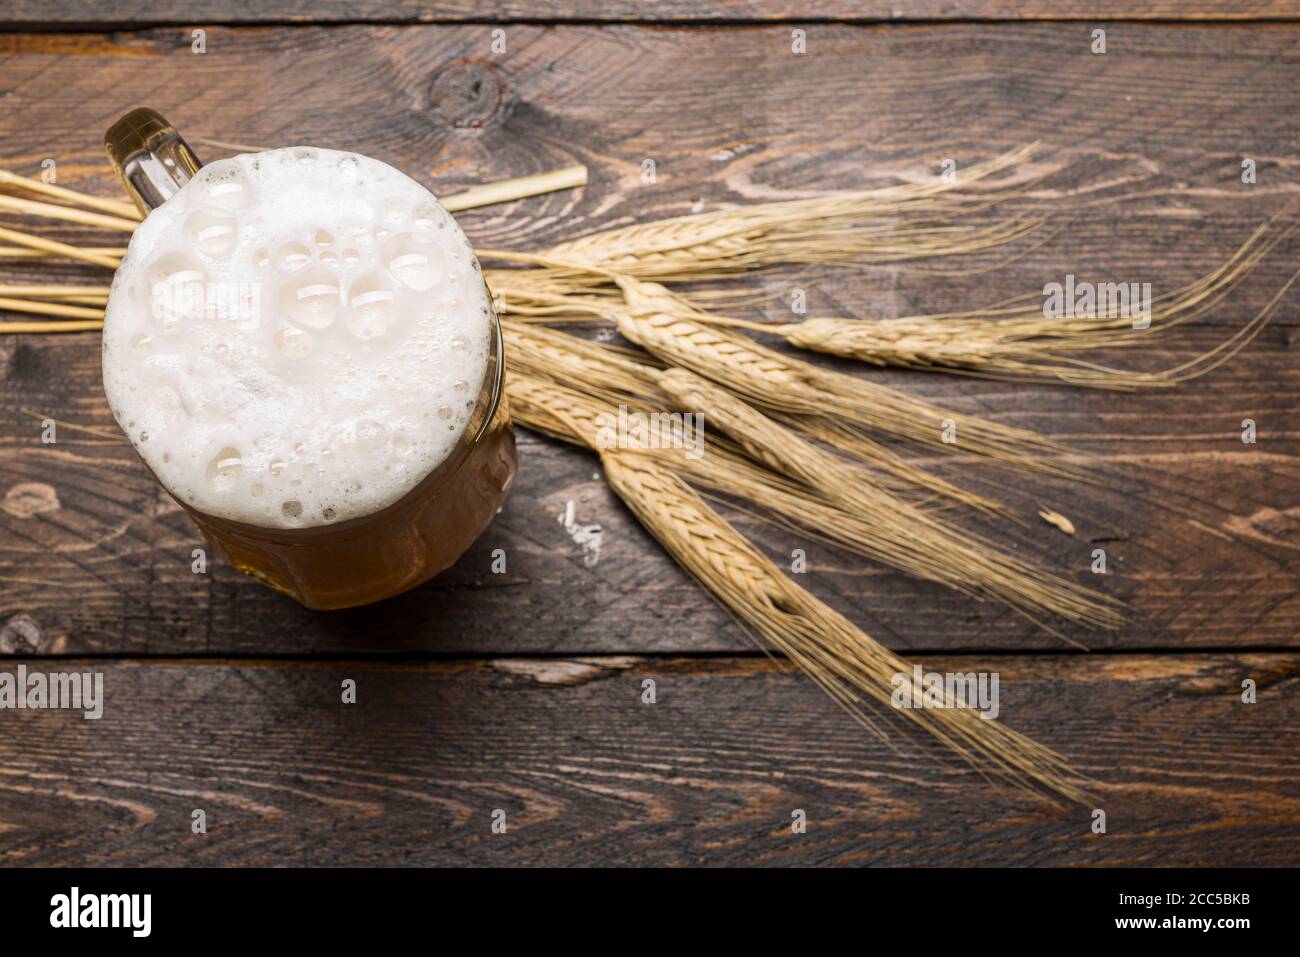 top view of beer pint with foam on wooden table with ears of wheat. Stock Photo